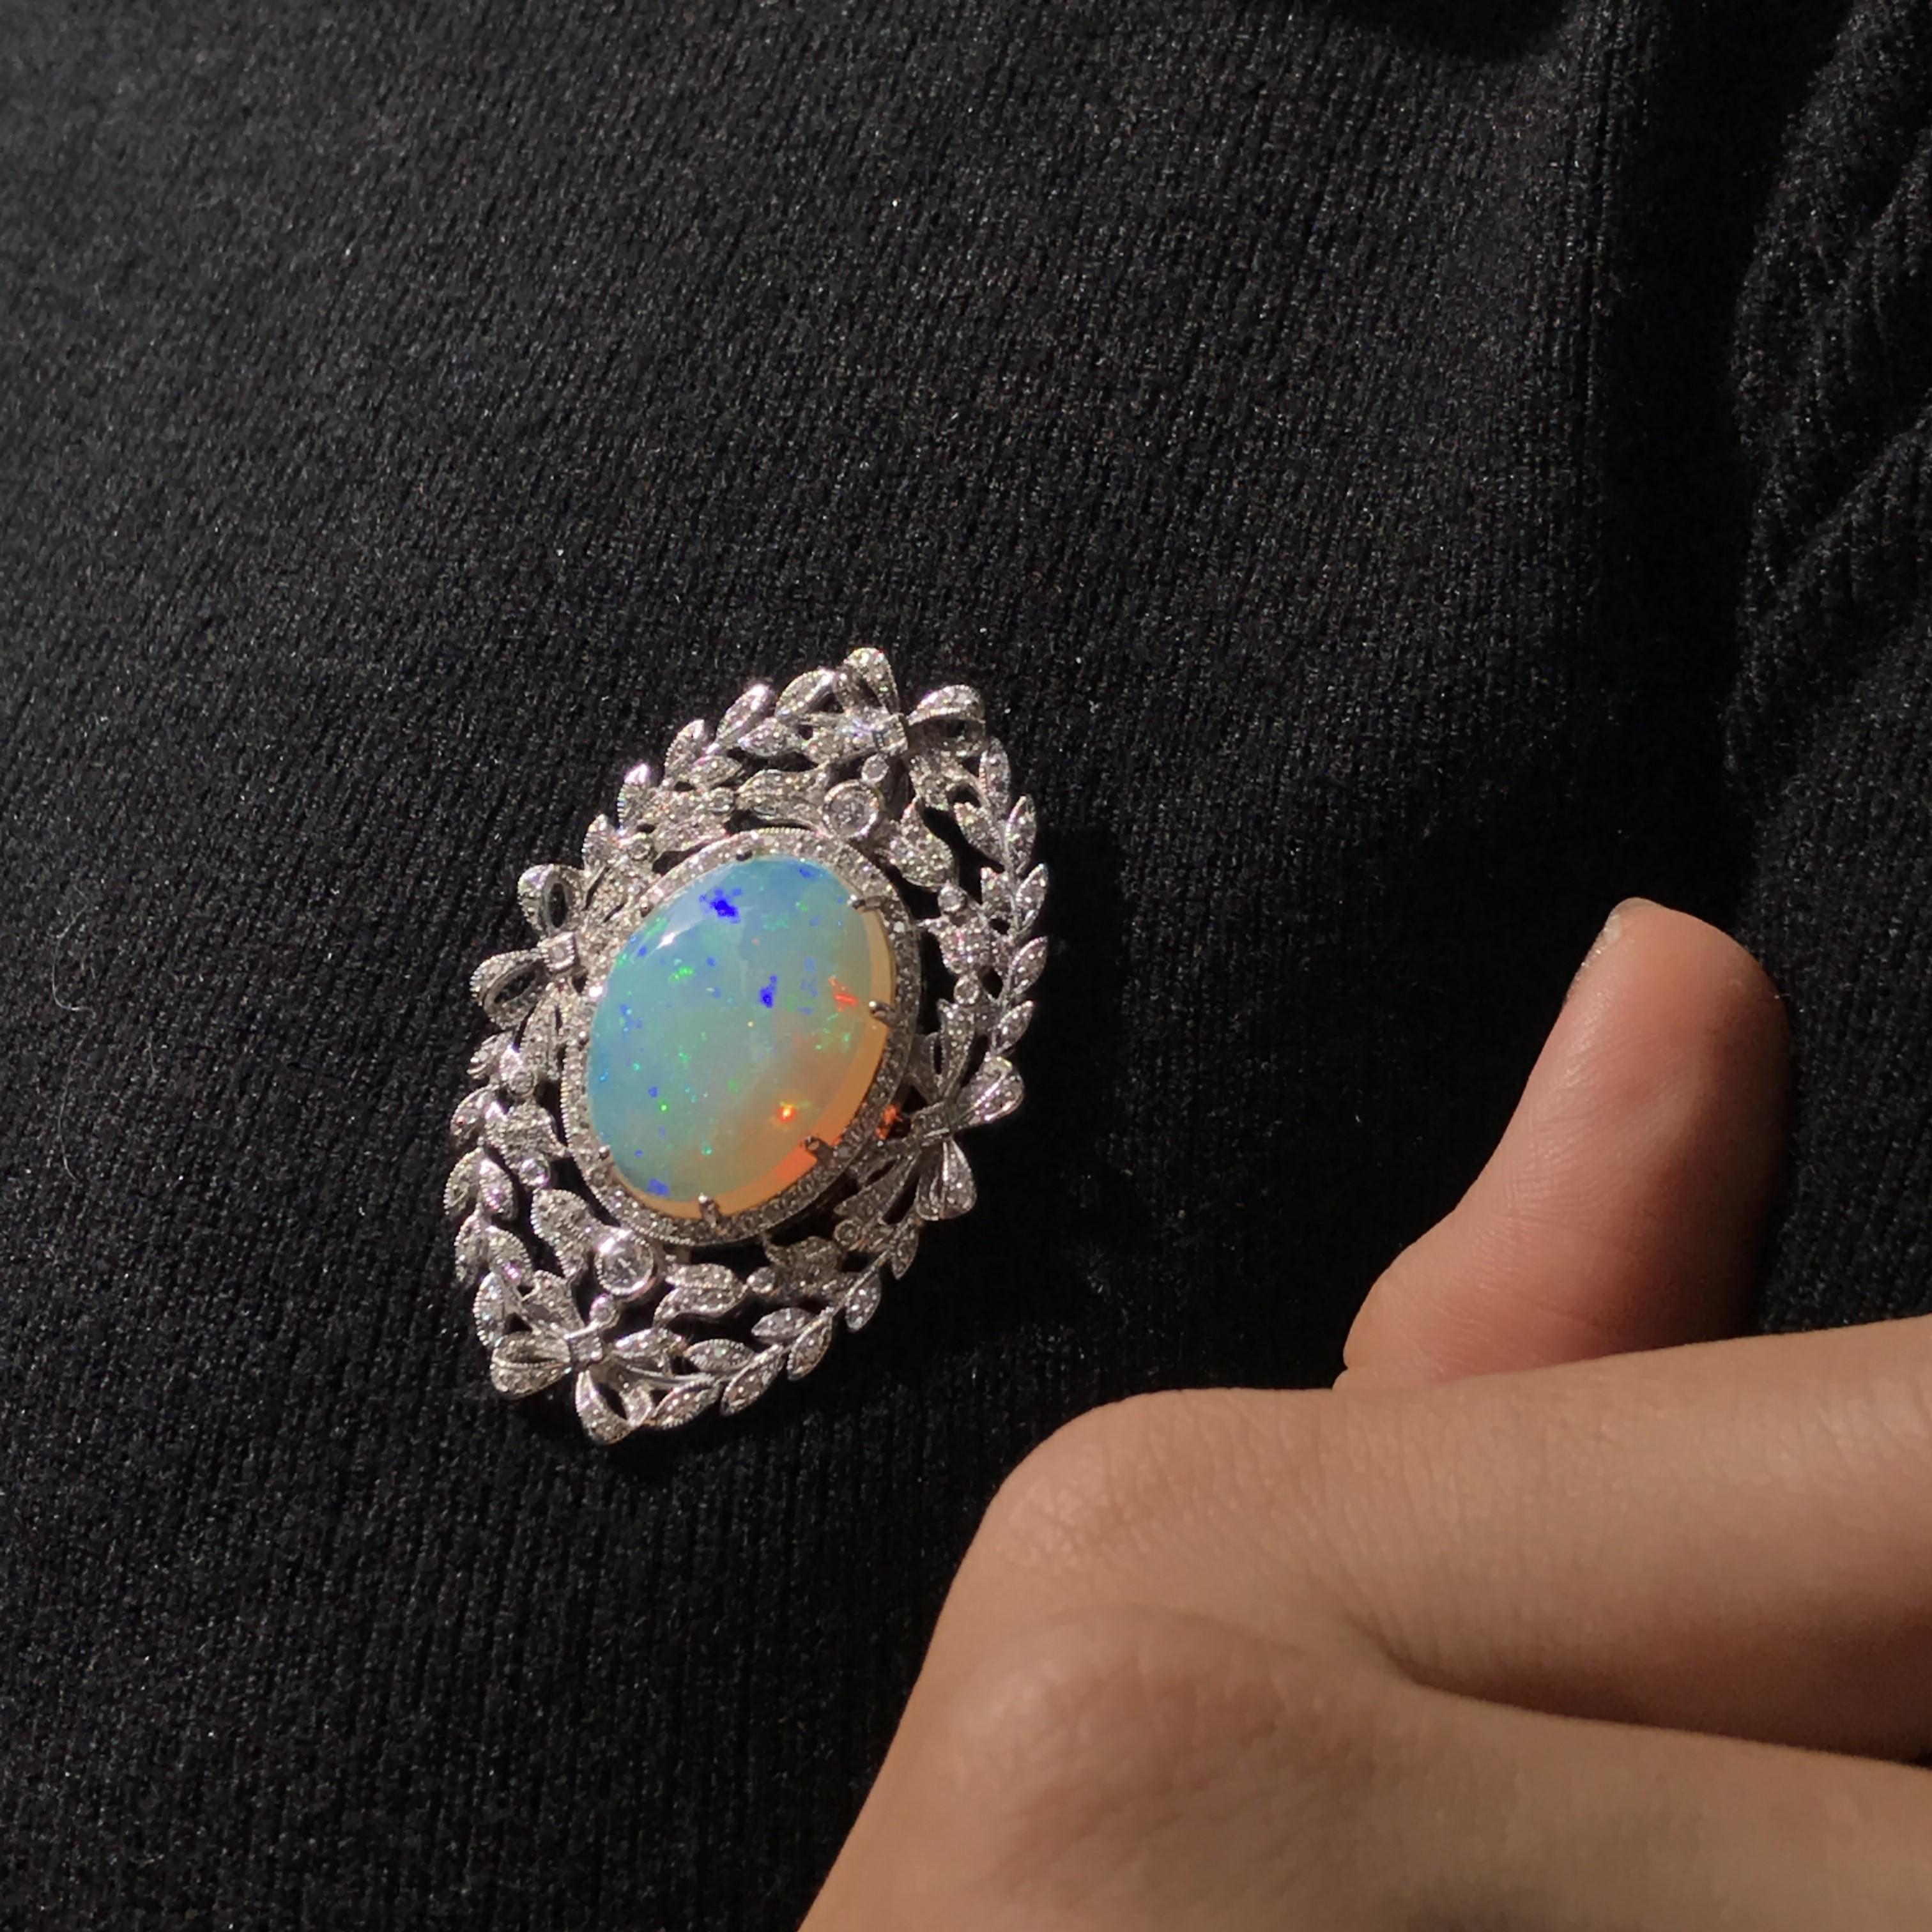 Edwardian Style 13.43 Ct. Ethiopian Opal and Diamond Brooch in 18K White Gold 2